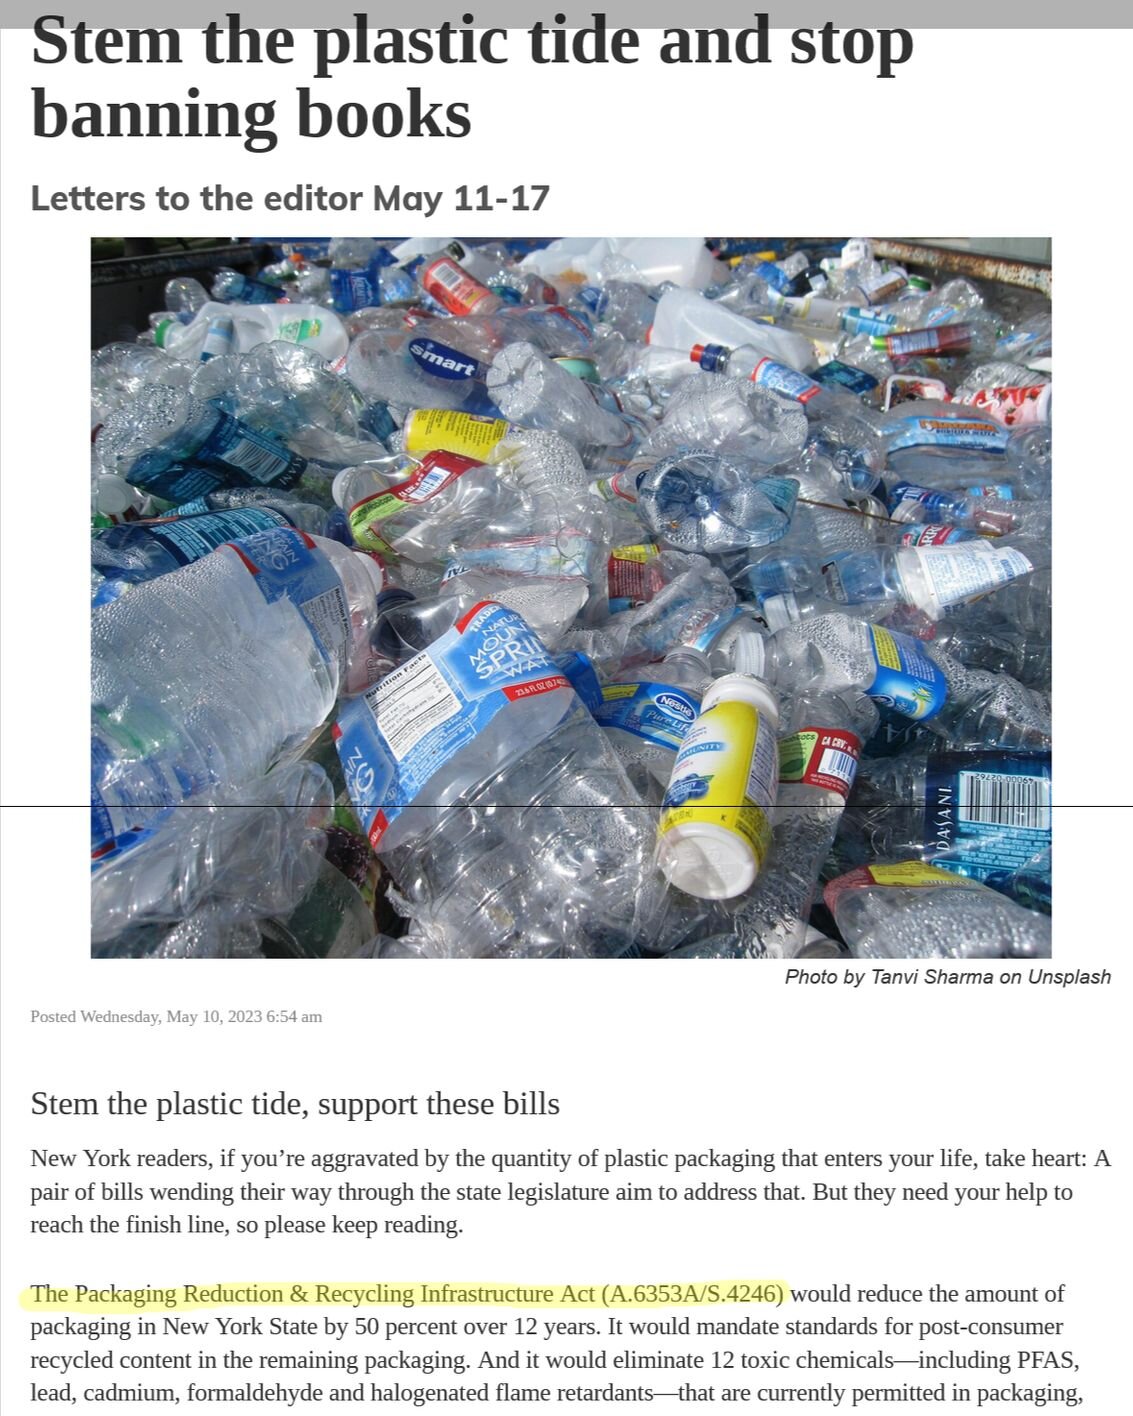 We agree 100% with this letter from @rebekahcreshkoff in Callicoon, NY urging Assemblymember Aileen Gunther to reduce packaging waste by 50%, slash climate warming emissions, remove toxic chemicals from packaging, invest in reuse and refill while giv